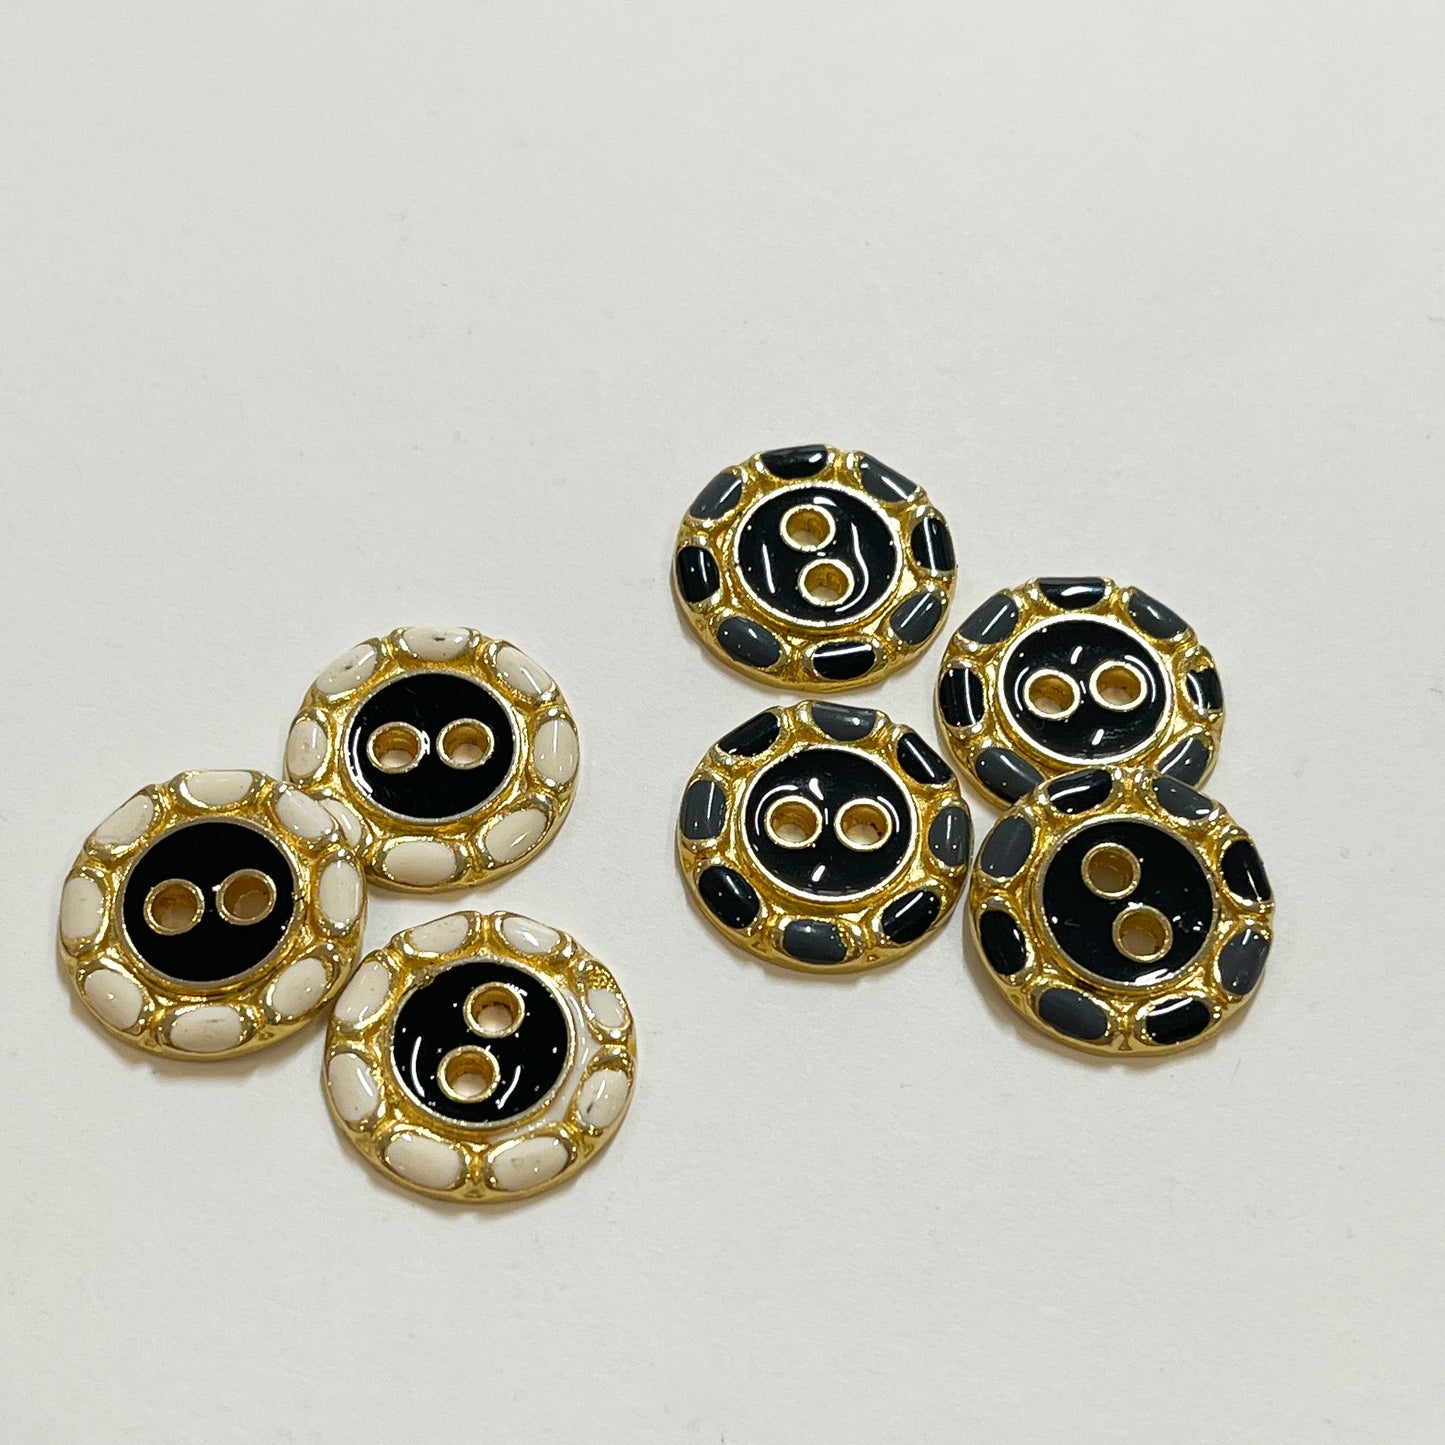 Beautiful enamelled buttons from the 1980s. We have very limited stock and these buttons are available in black/white as a set of 3 or in navy/blue as a set of 4.